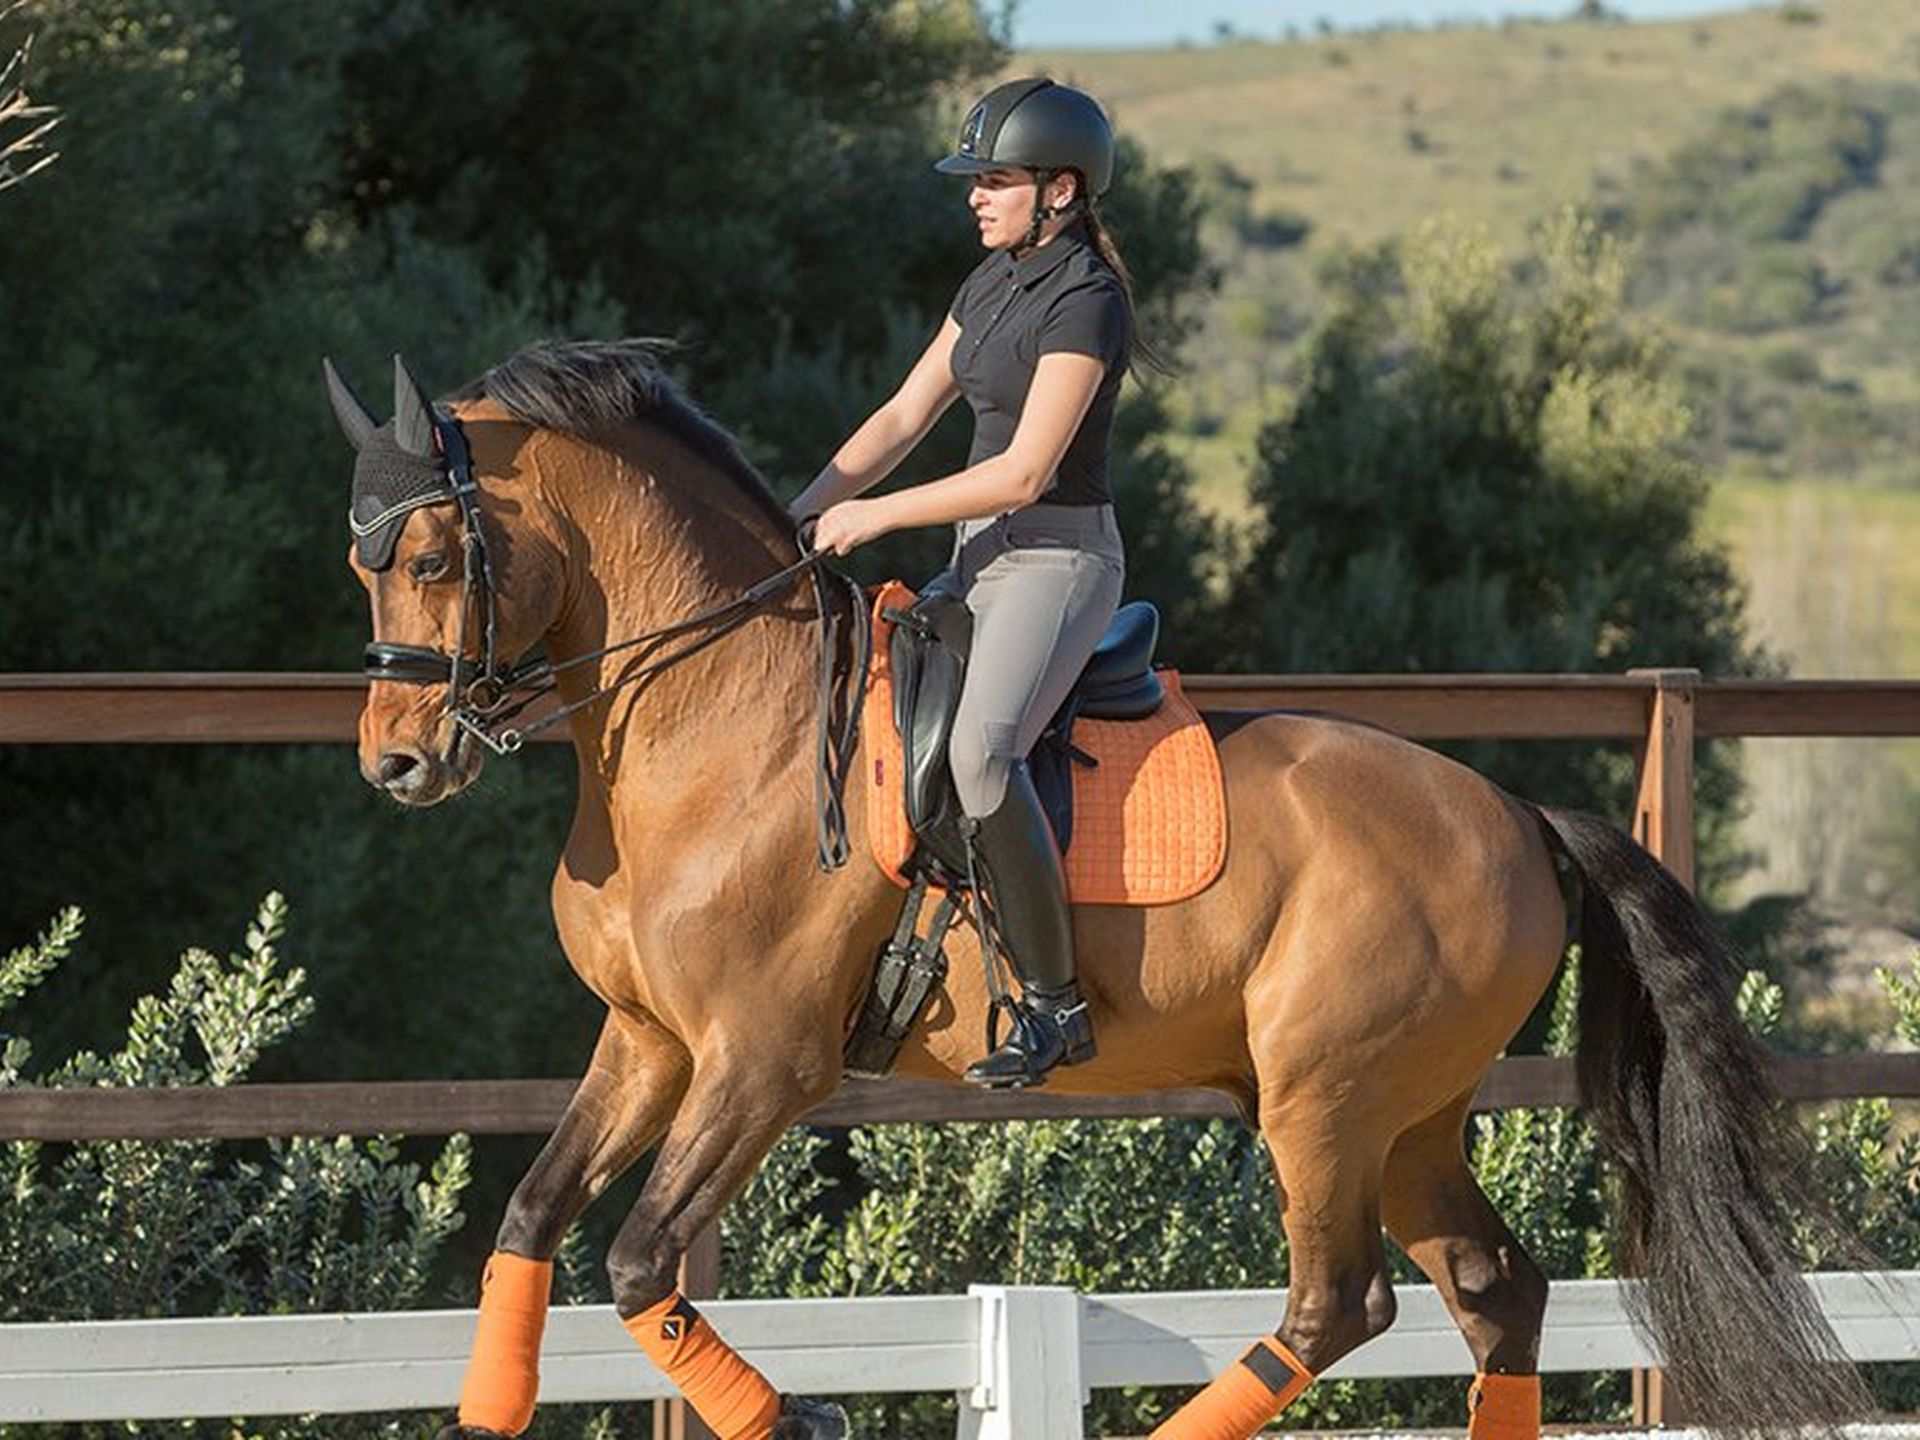 What To Wear Horseback Riding: Do's, Don'ts for Style & Function!   Horseback riding outfits, Horse riding outfit, Horse riding clothes